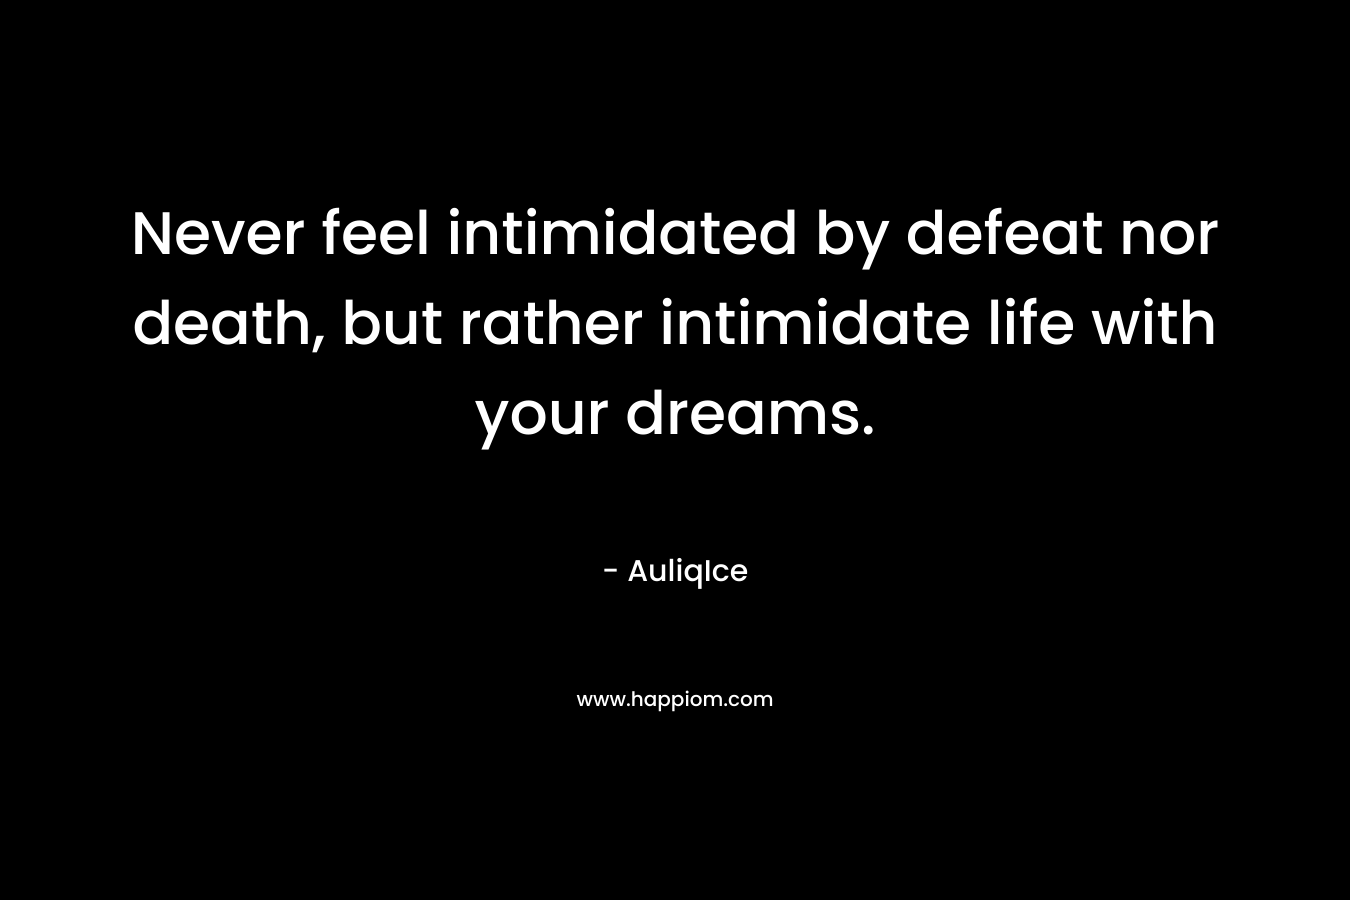 Never feel intimidated by defeat nor death, but rather intimidate life with your dreams. – AuliqIce